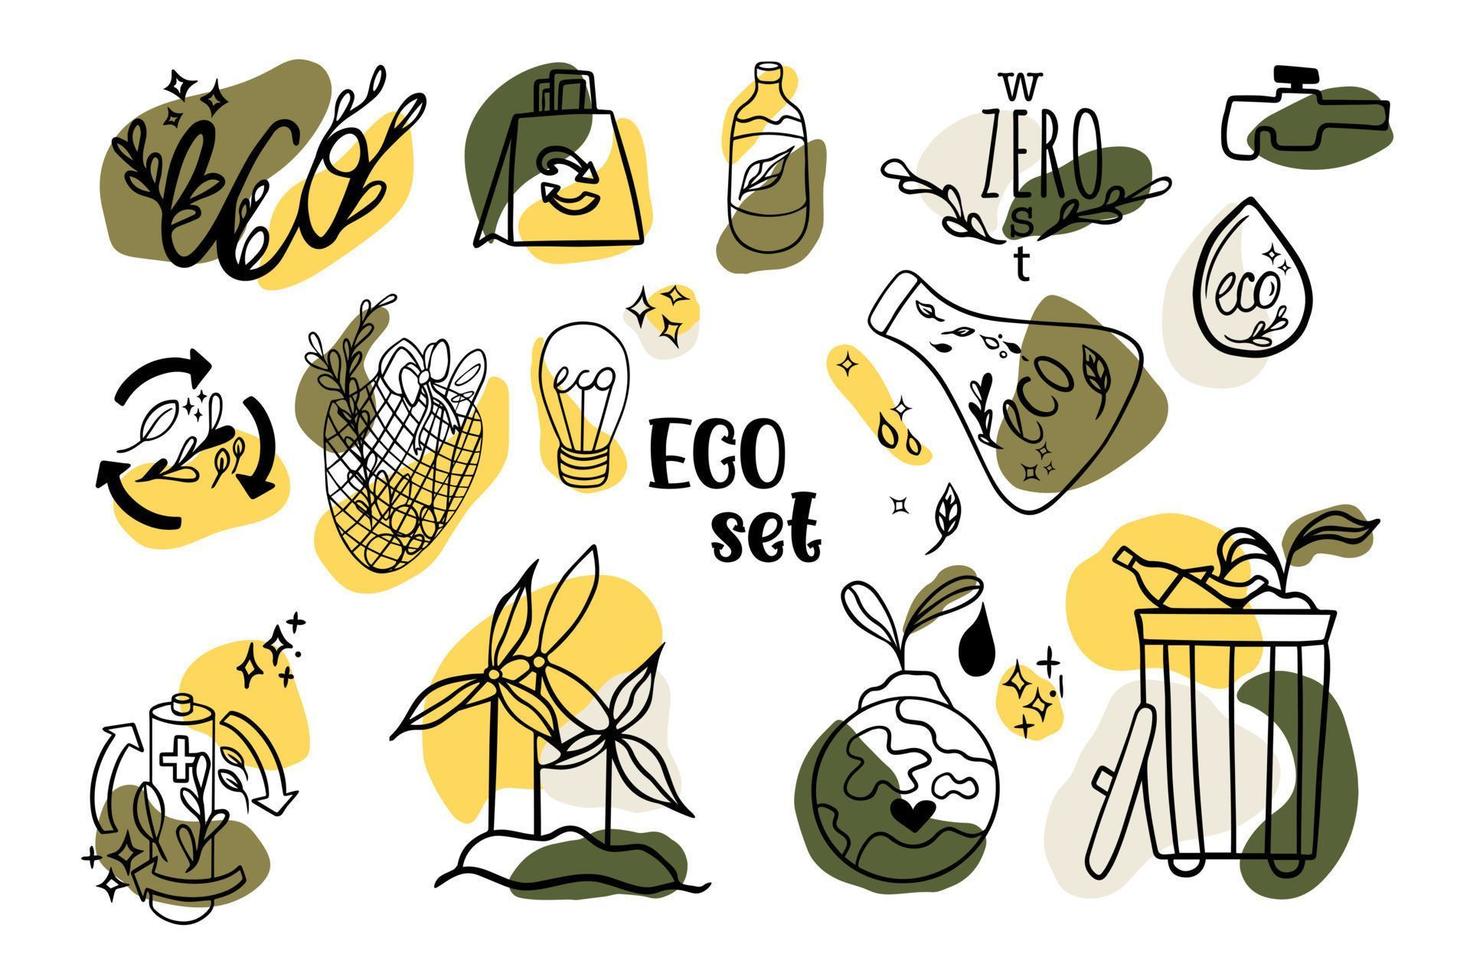 Doodle set ecology, garbage recycling vector